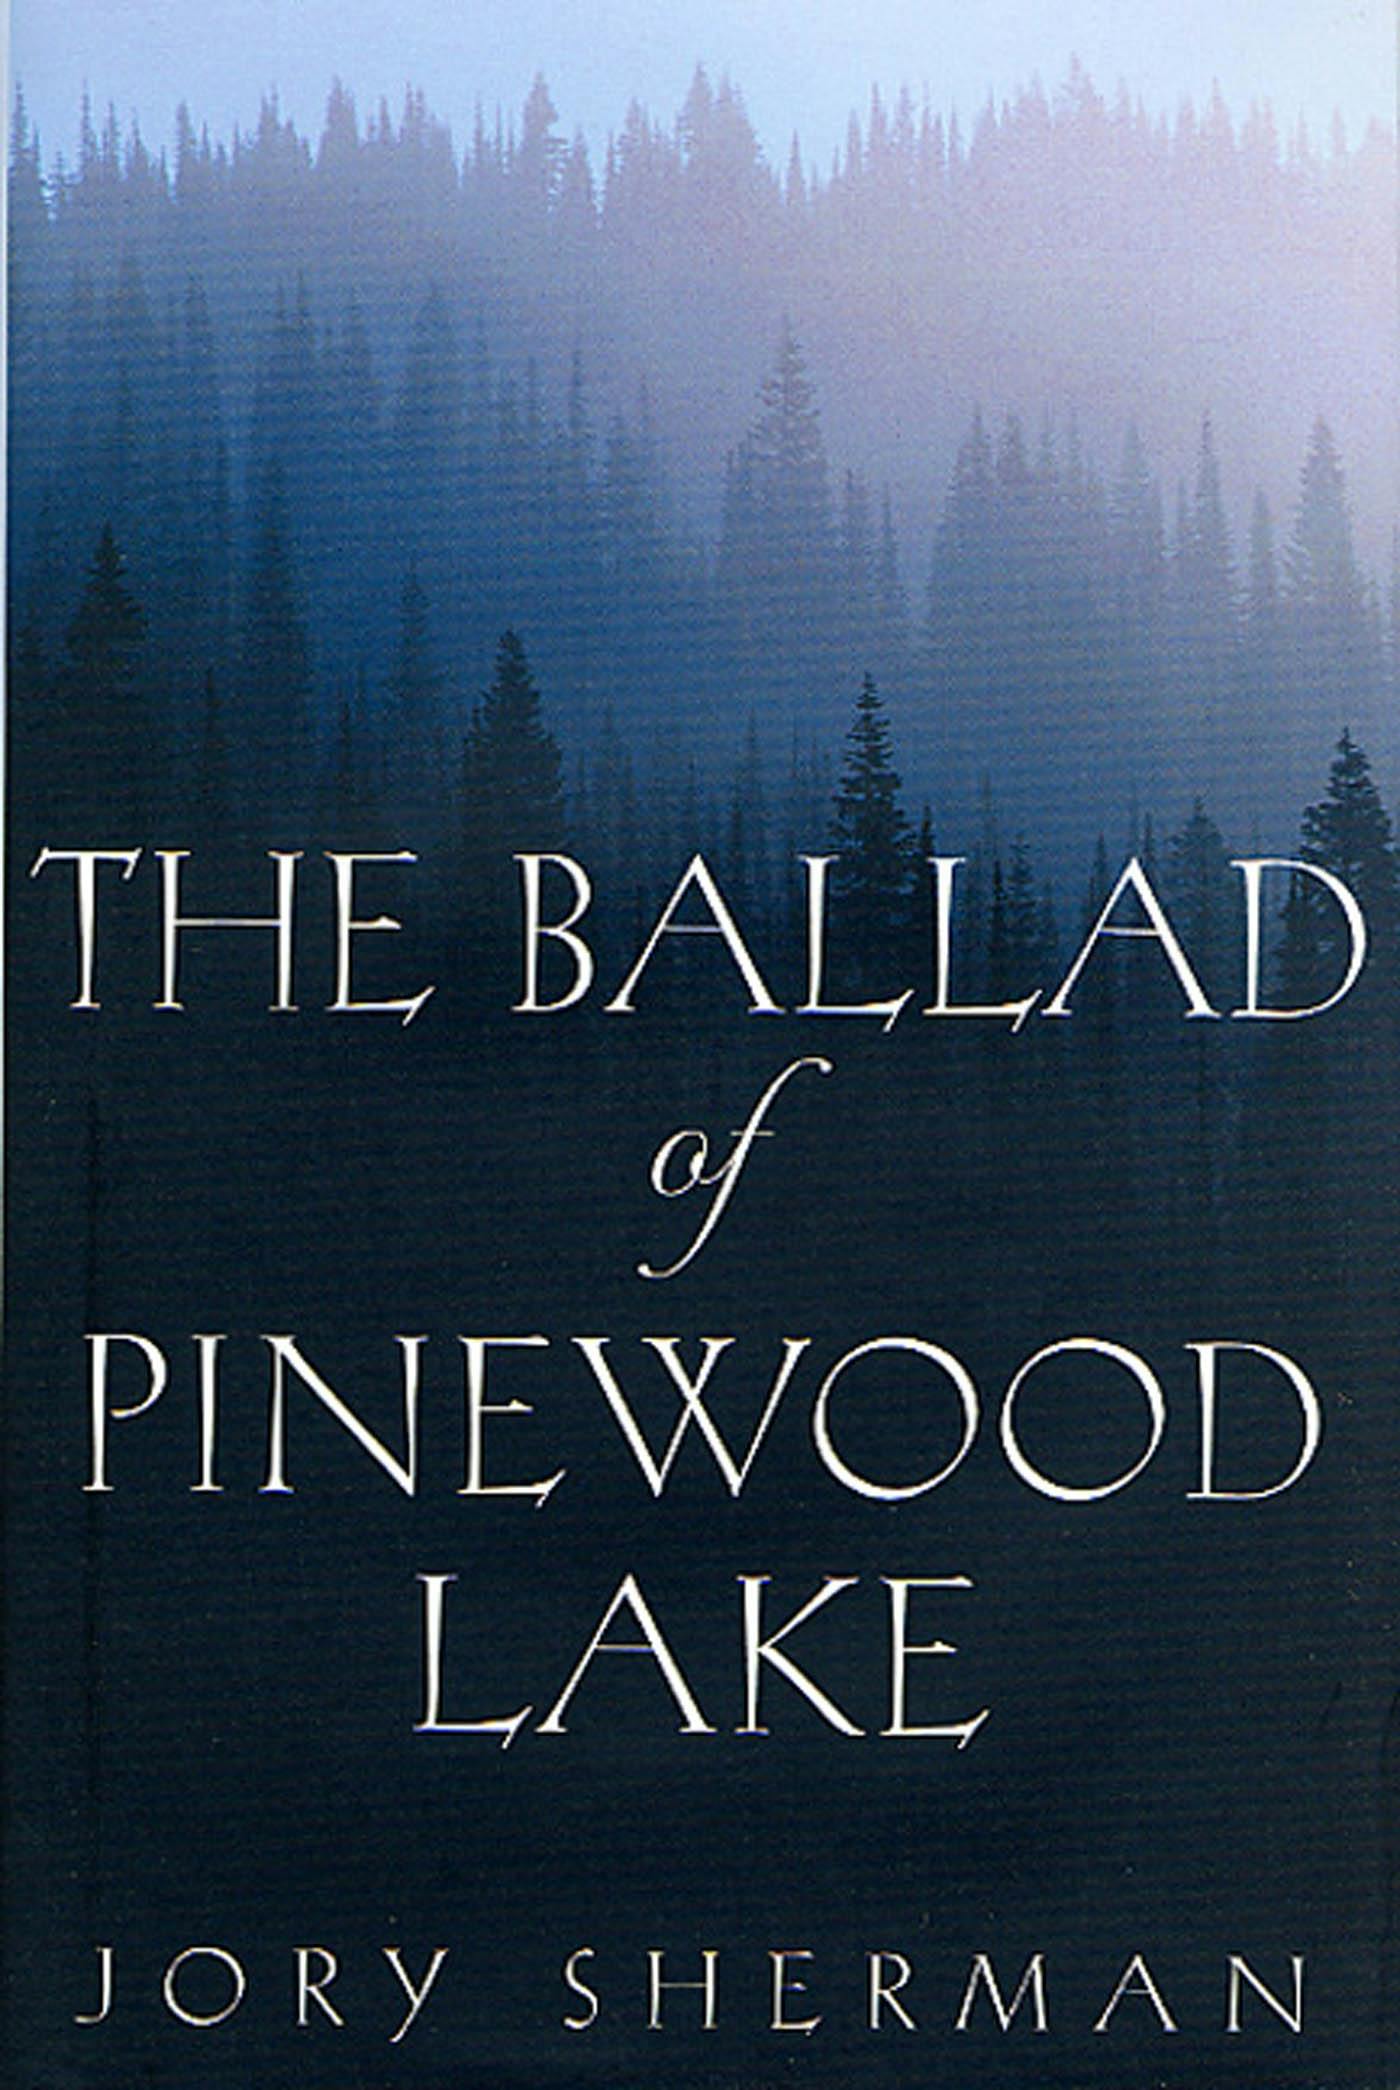 Cover for the book titled as: The Ballad of Pinewood Lake